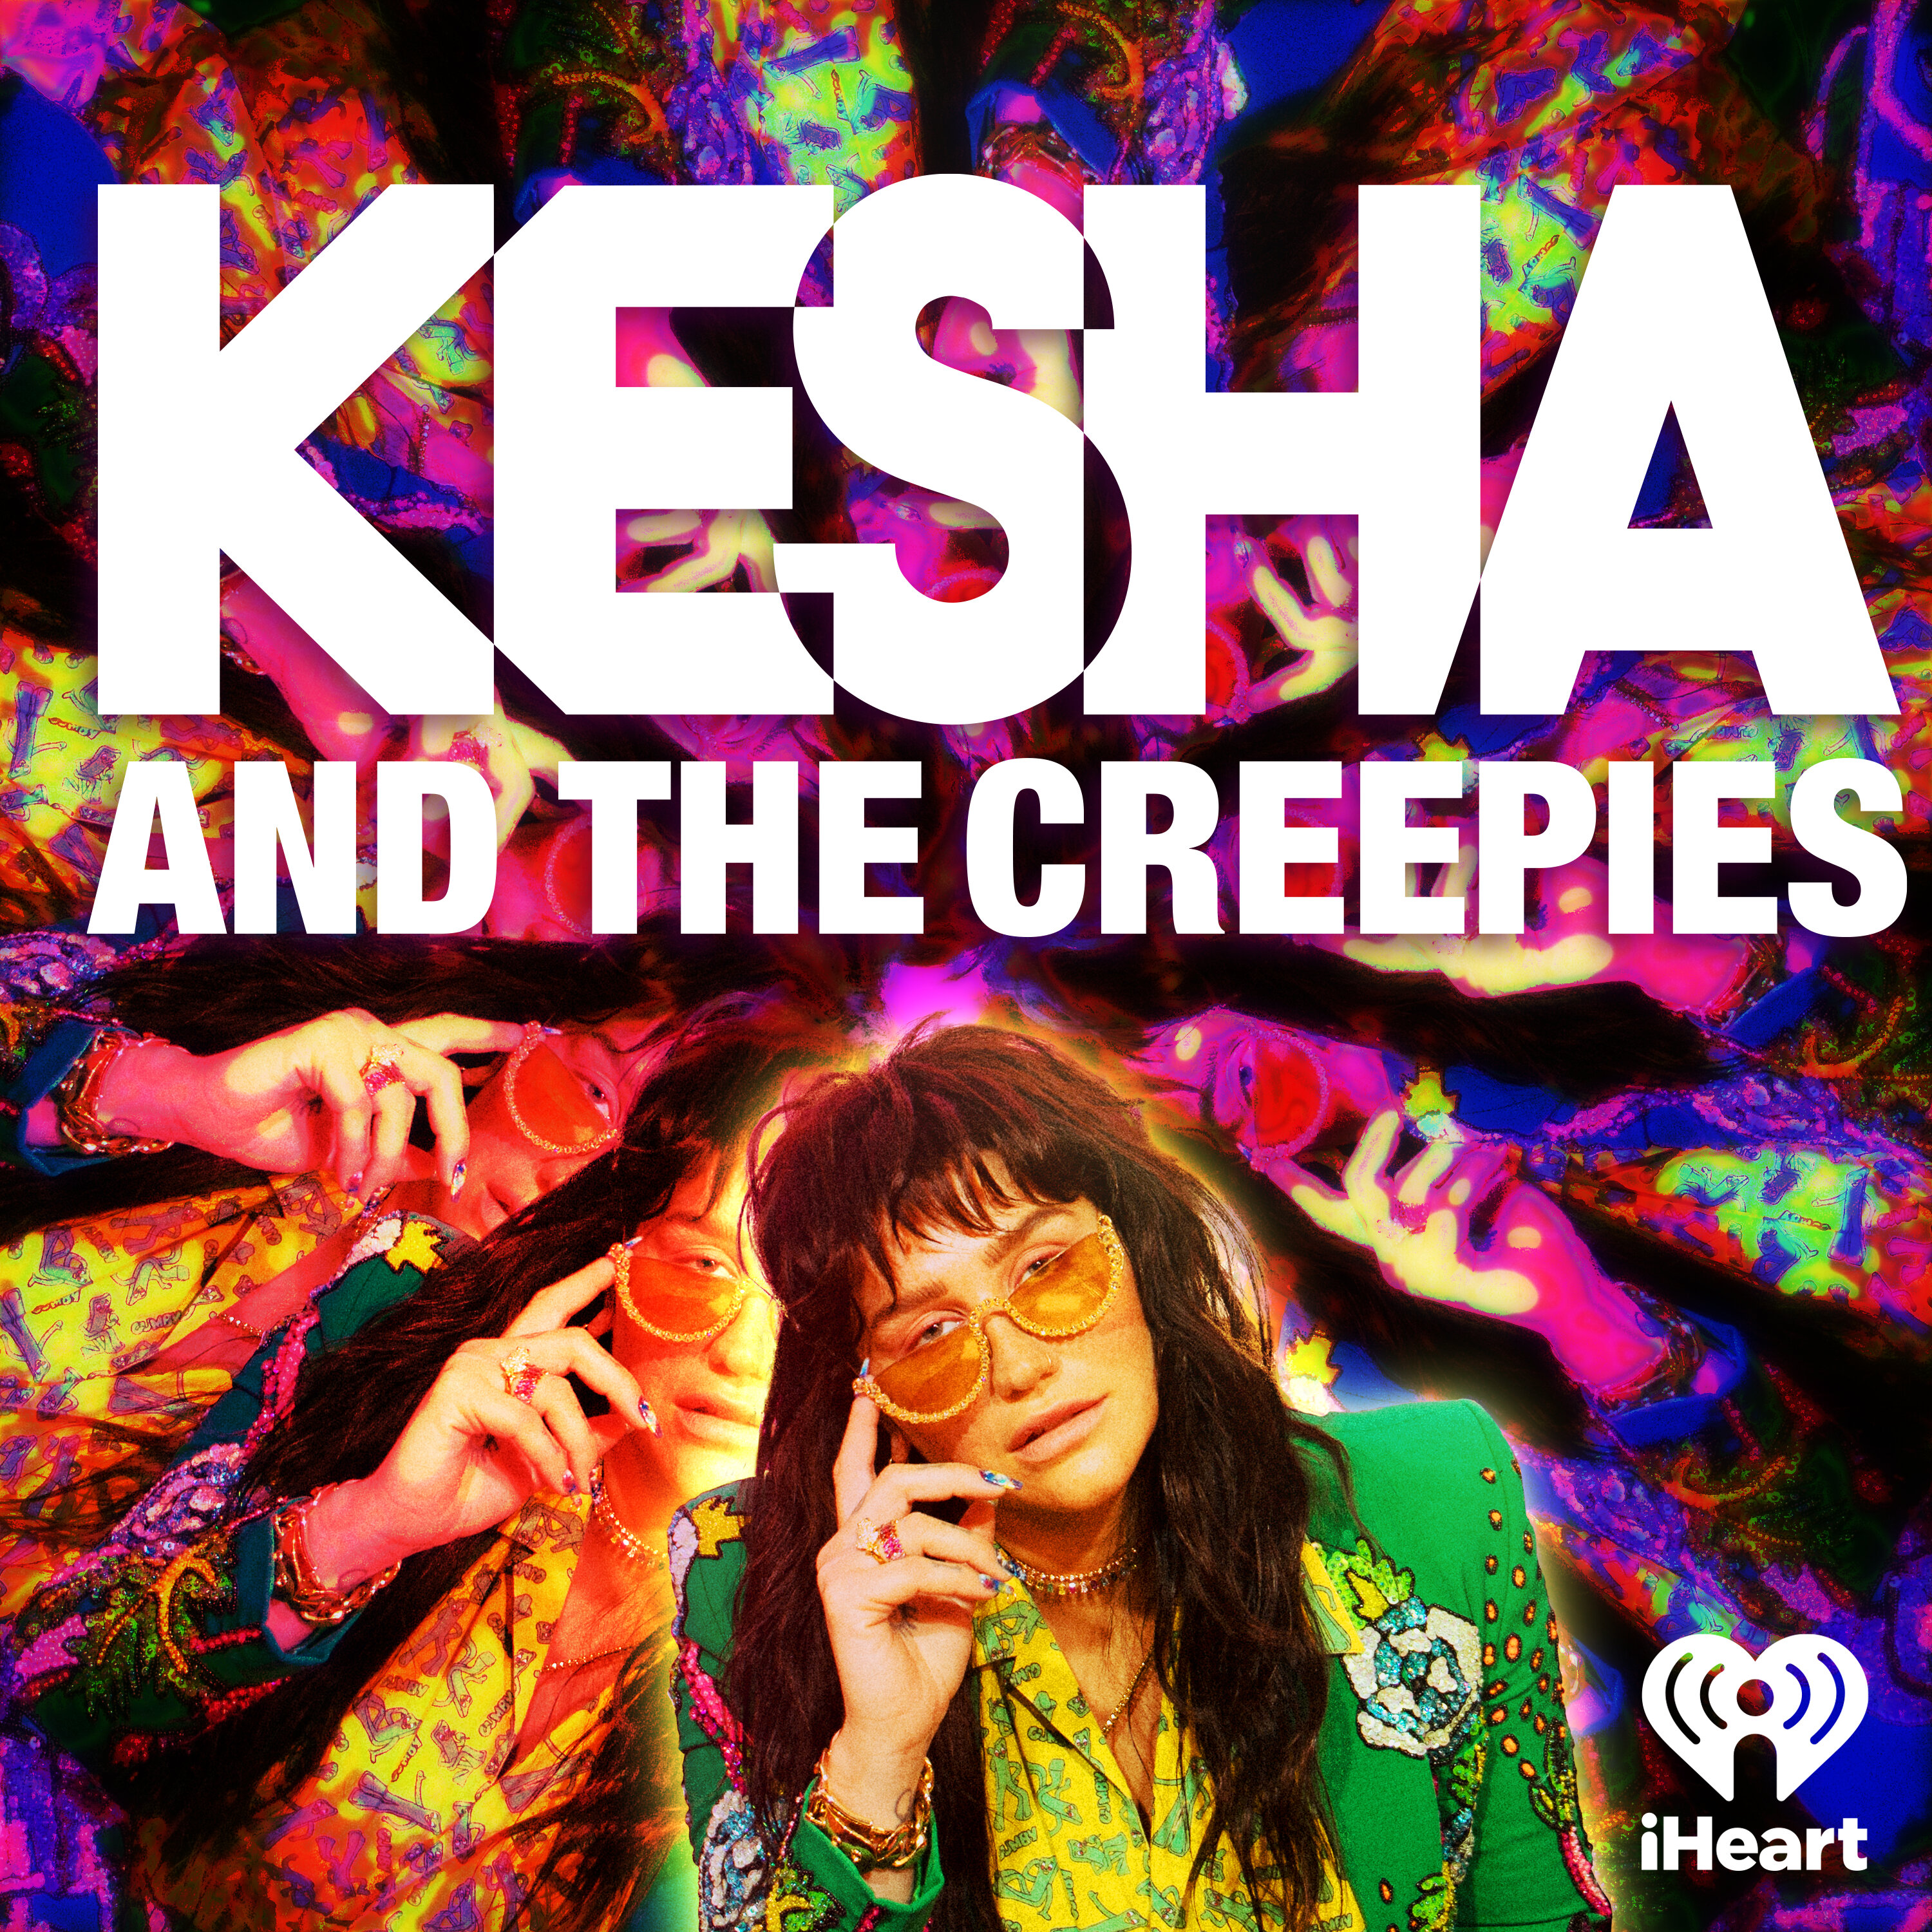 Kesha and the Creepies podcast show image